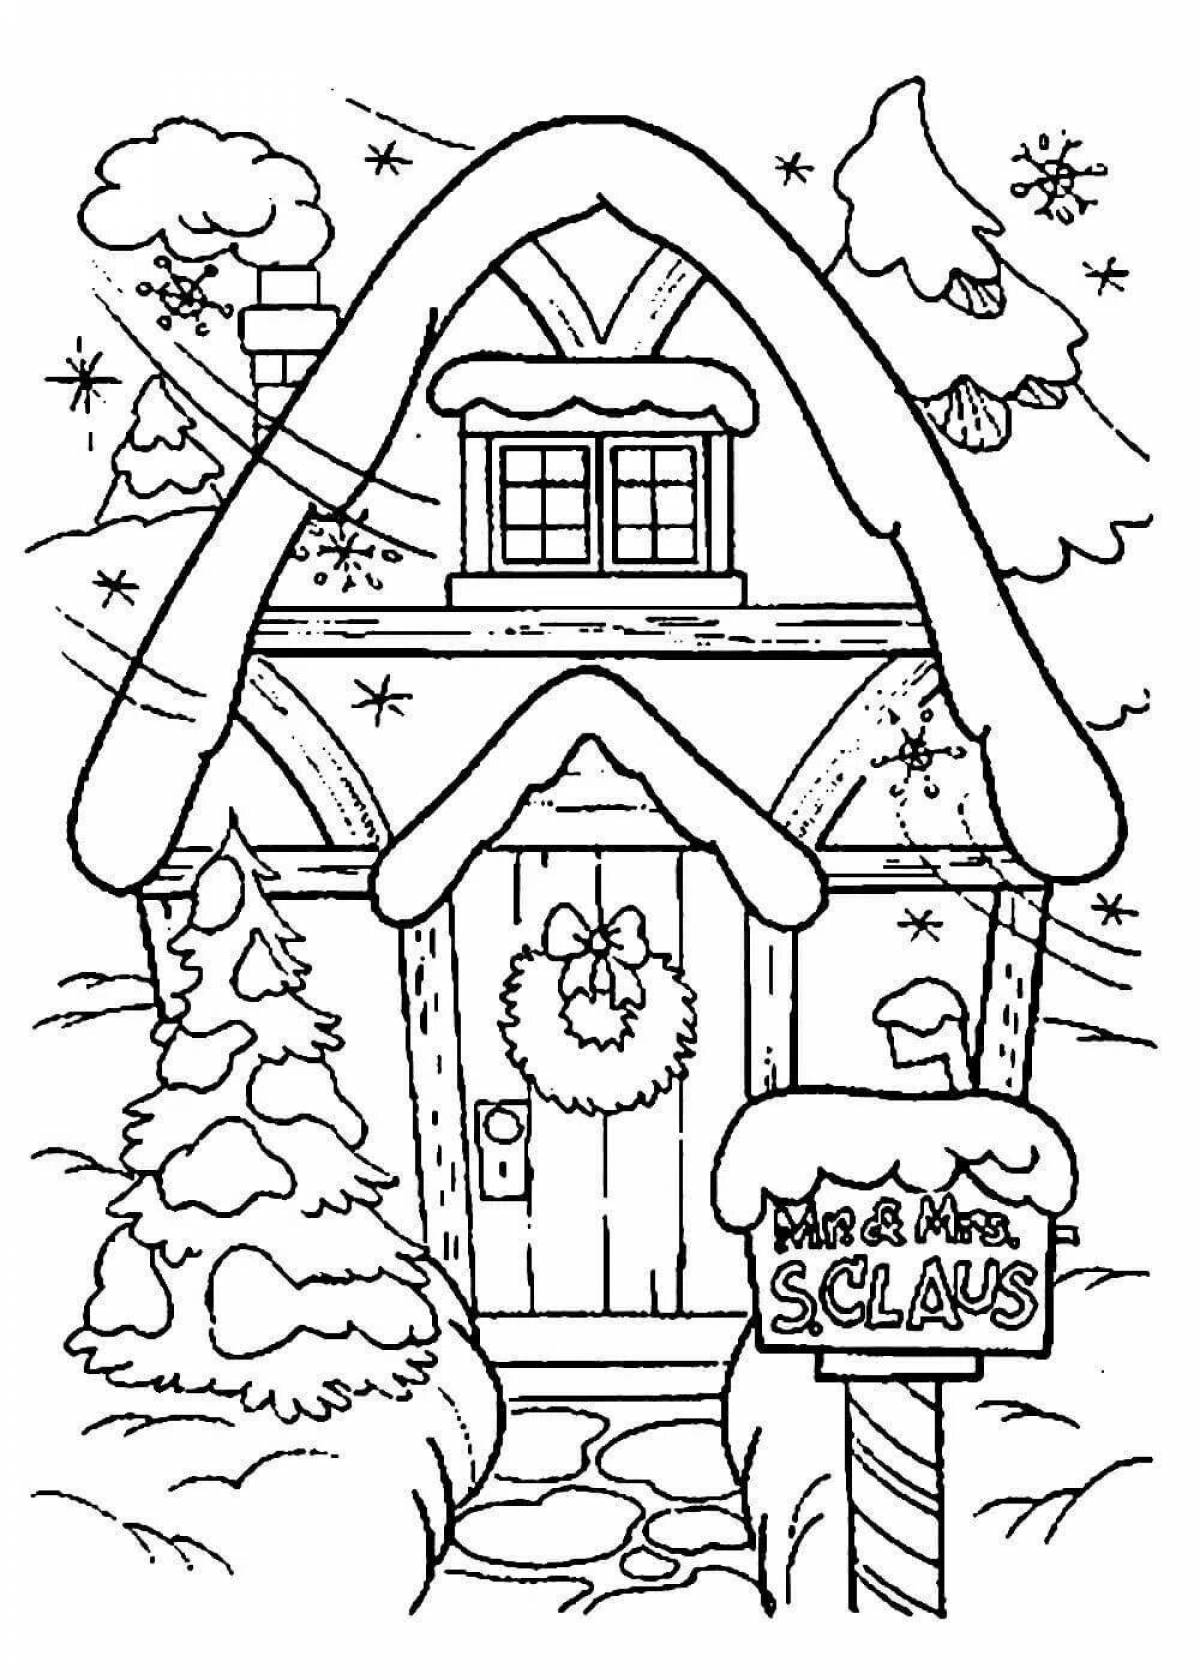 Magic bast and ice hut coloring page